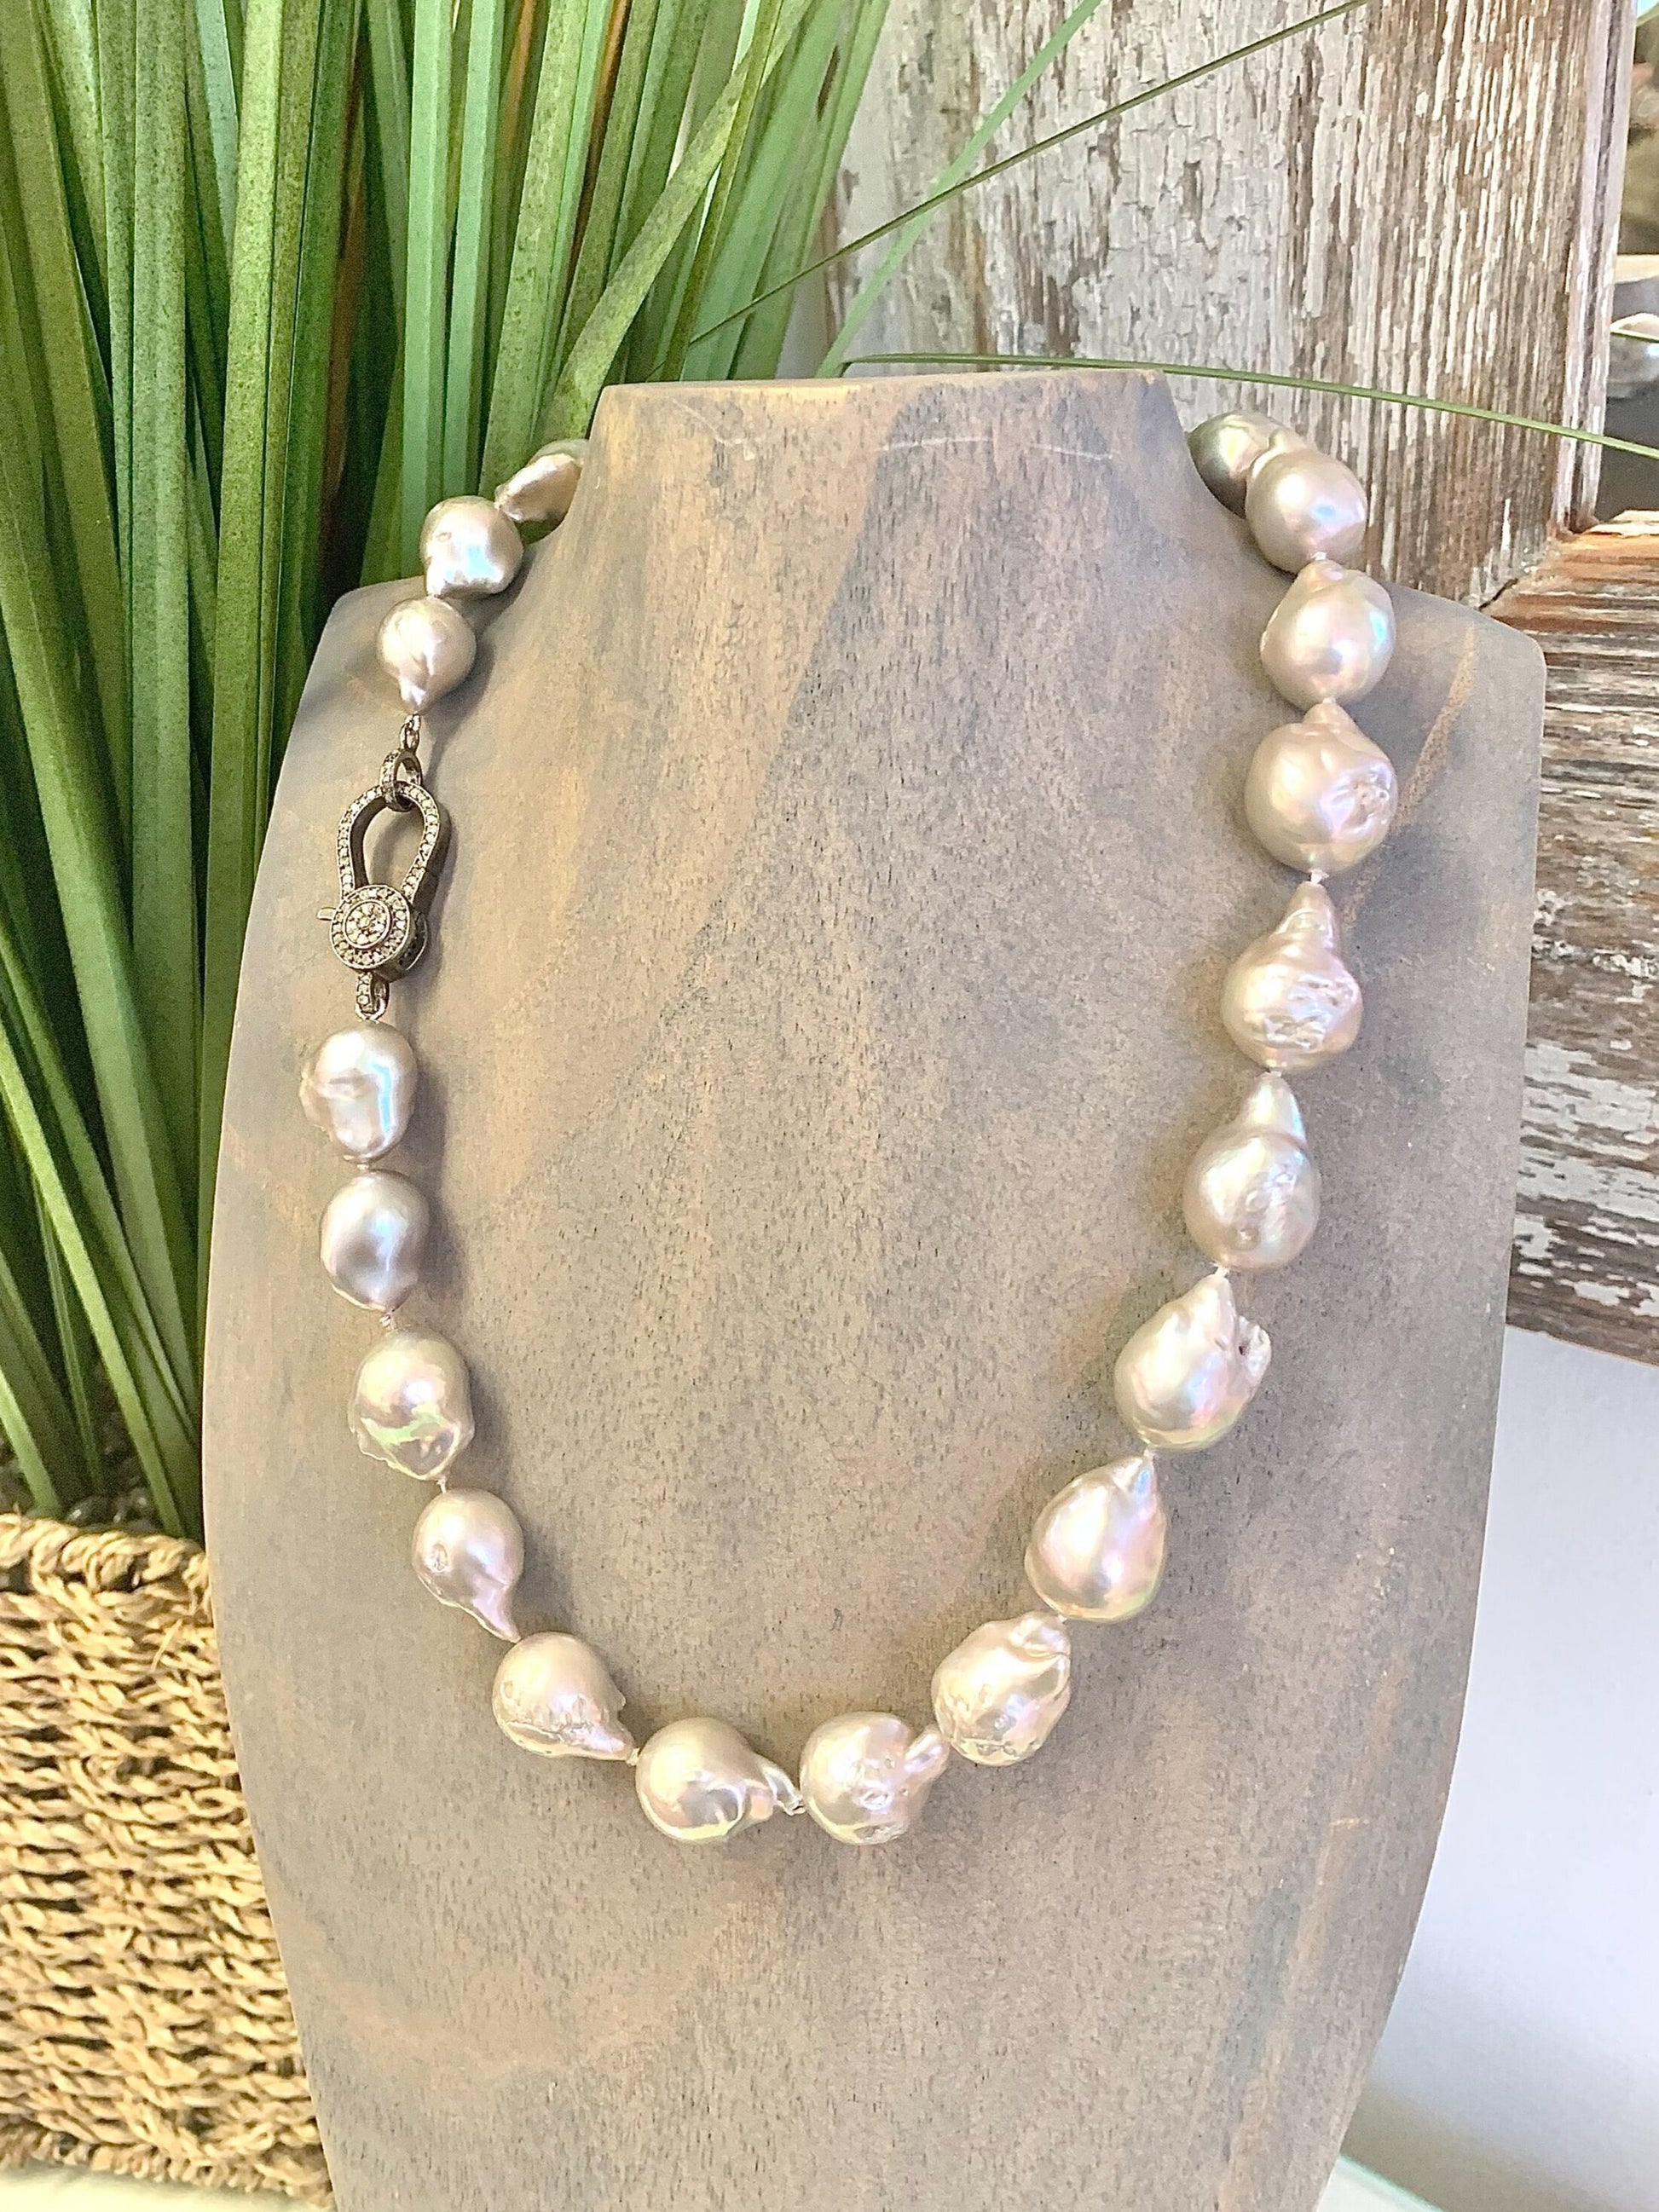 Cultured Pearl Necklace Sterling Silver